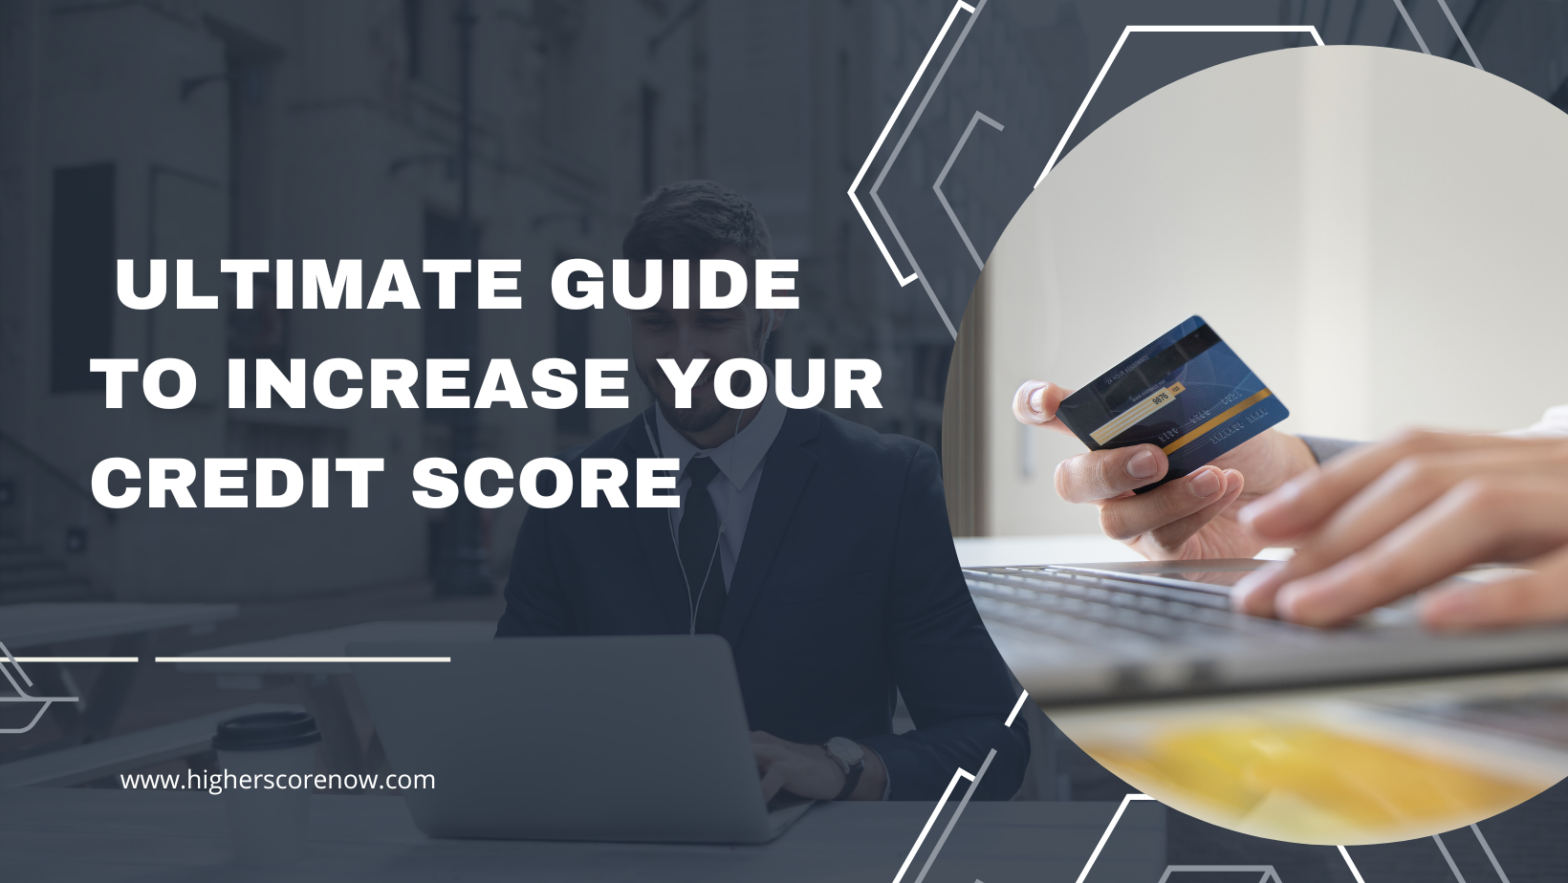 The Ultimate Guide to Increasing Your Credit Score